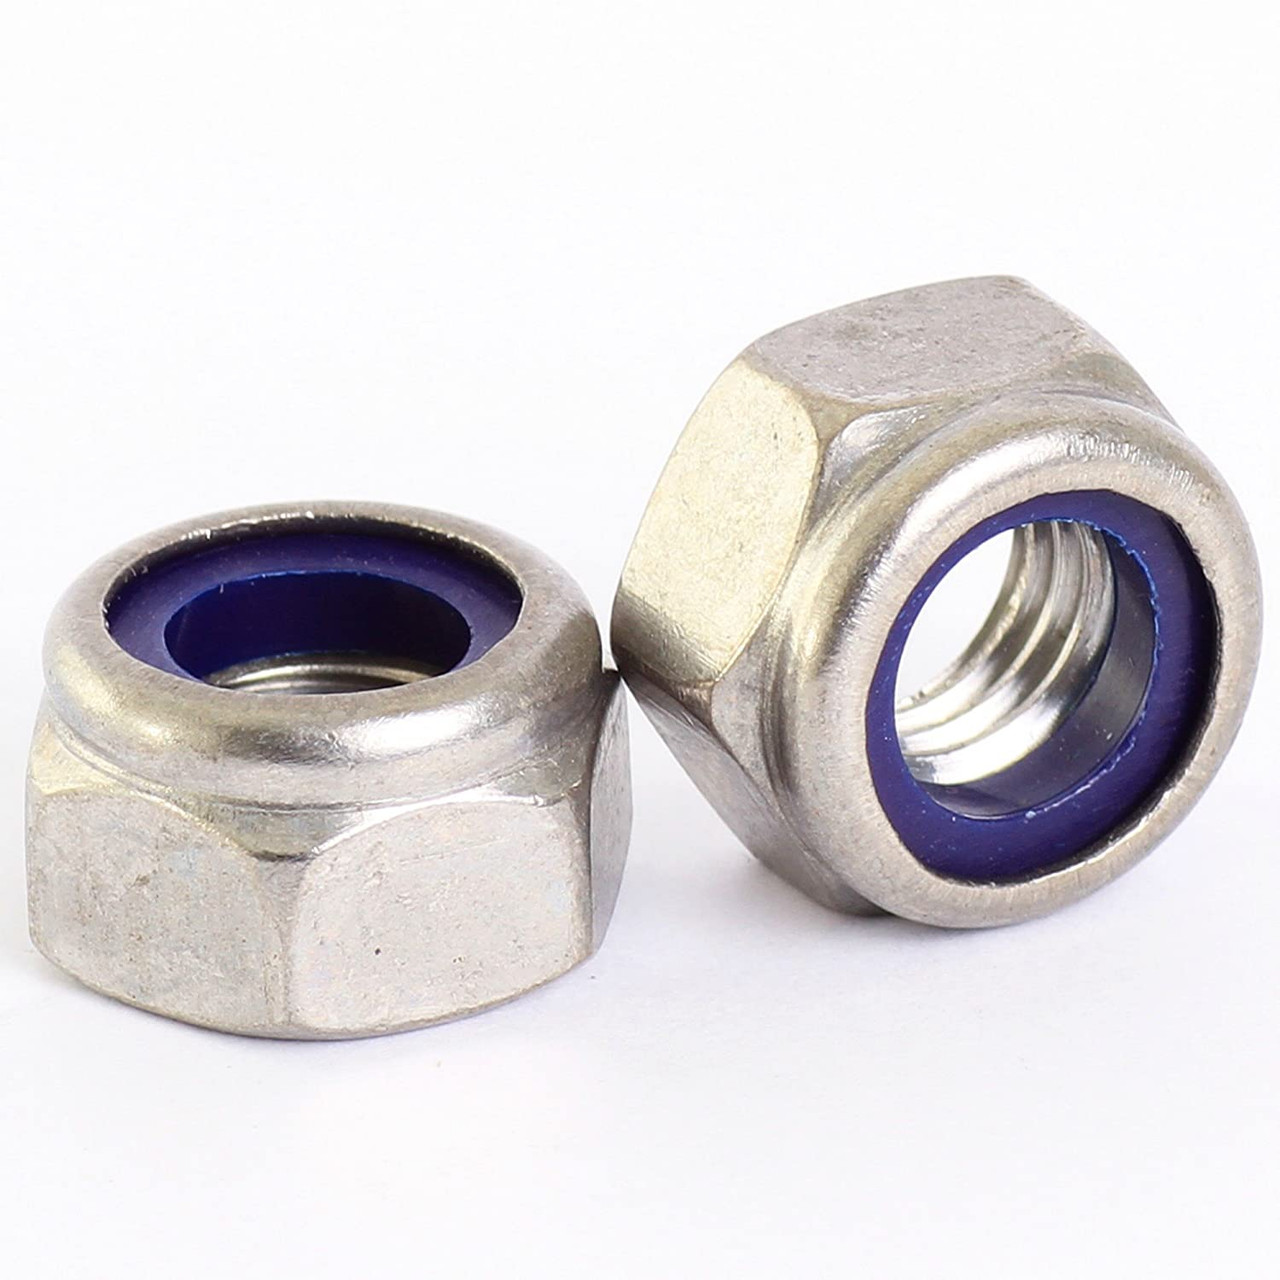 Pack of M2.5 M3 M4 M5 A2 Stainless Steel Nylon Insert Nylock Nyloc Lock Nuts 100 Mix Pack